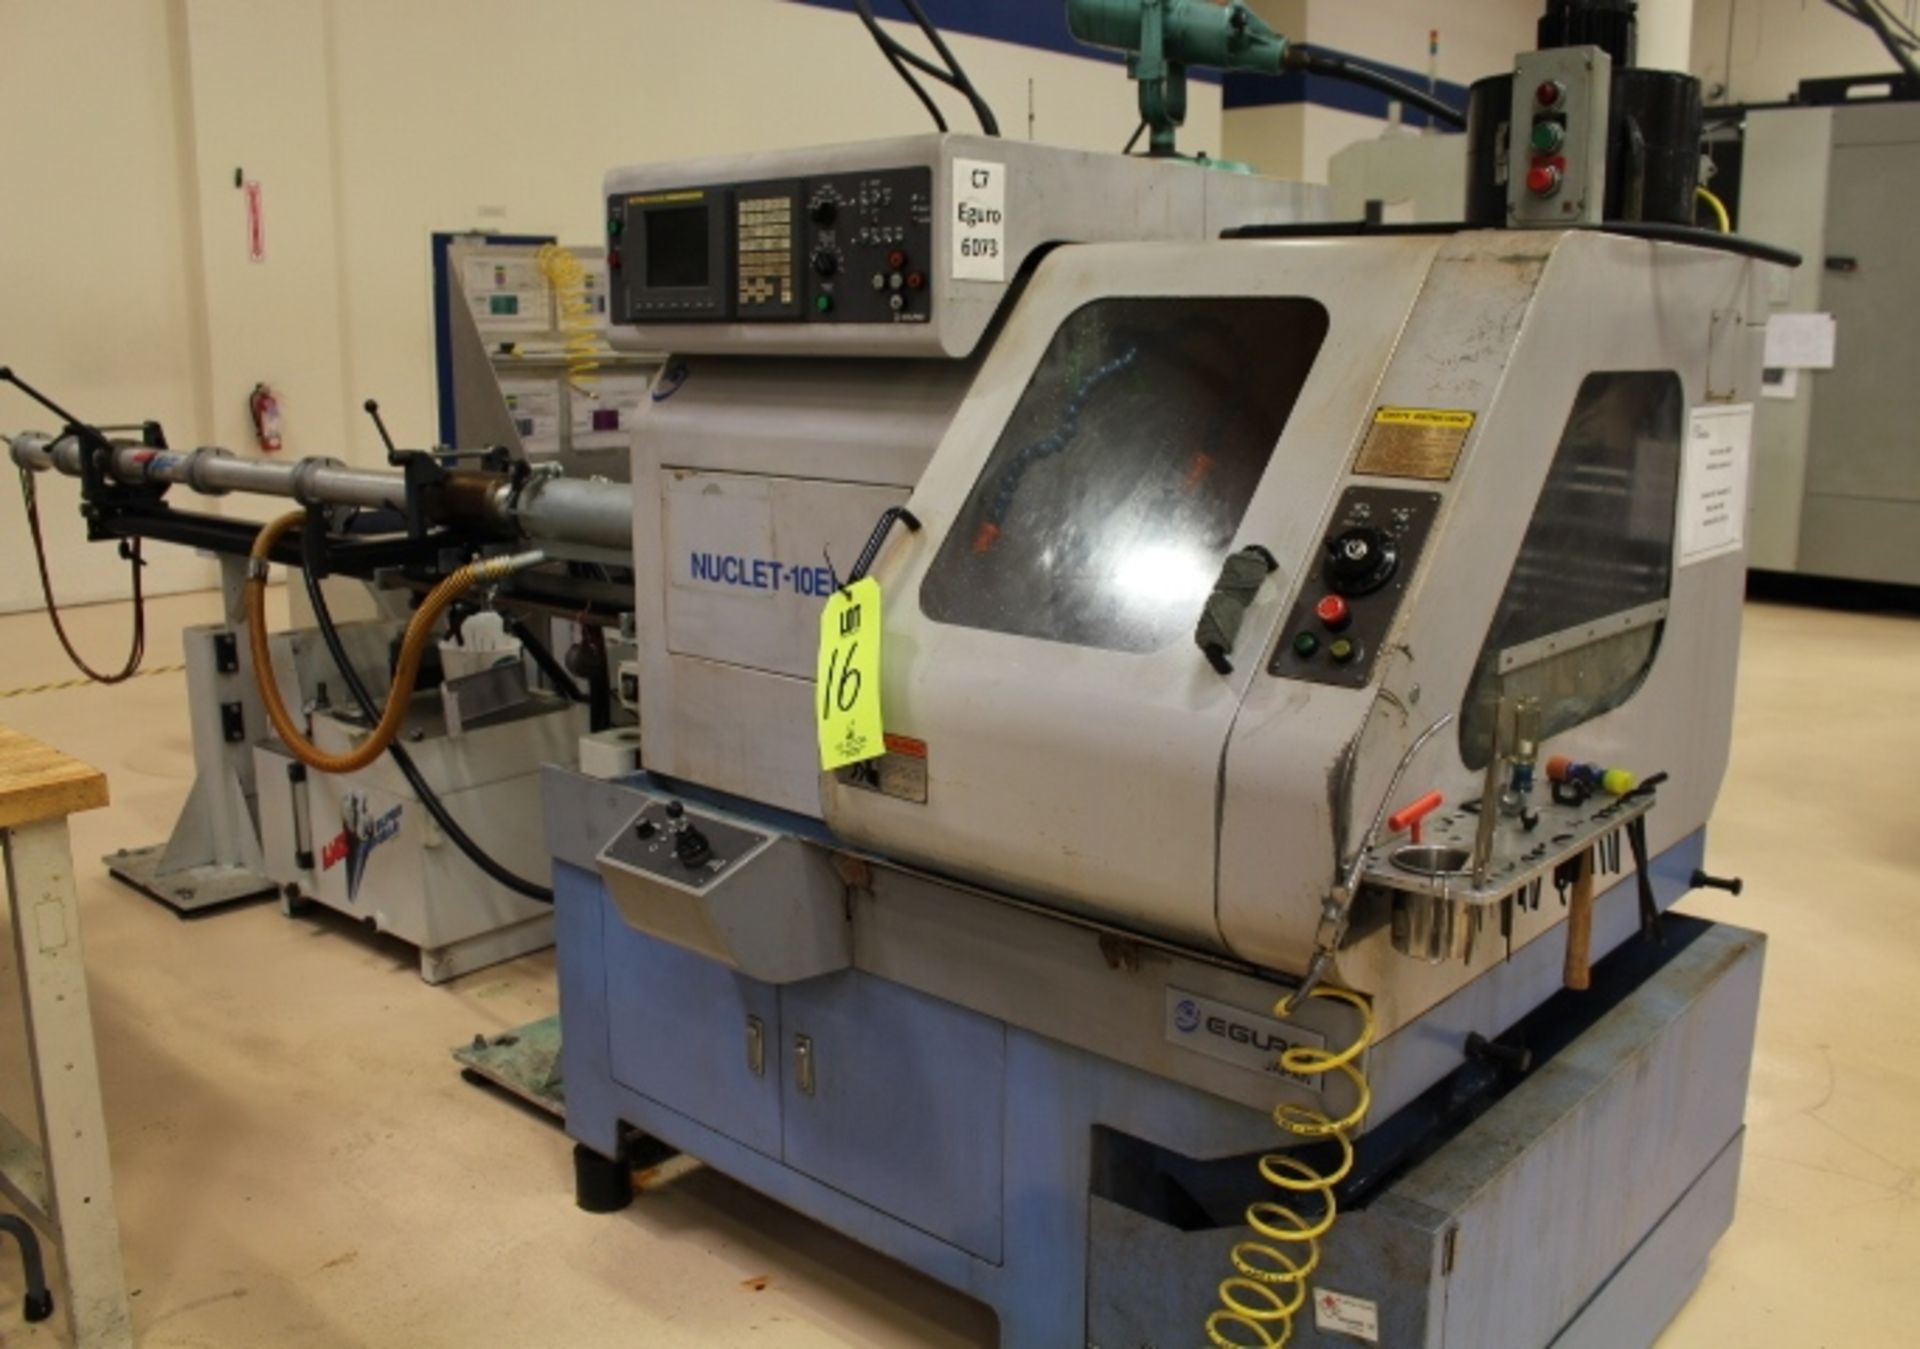 EGURO NUCLET 10-EL CNC GANG TYPE TURNING CENTER, FANUC SERIES 21i-TB CONTROL, MIST COLLECTOR,